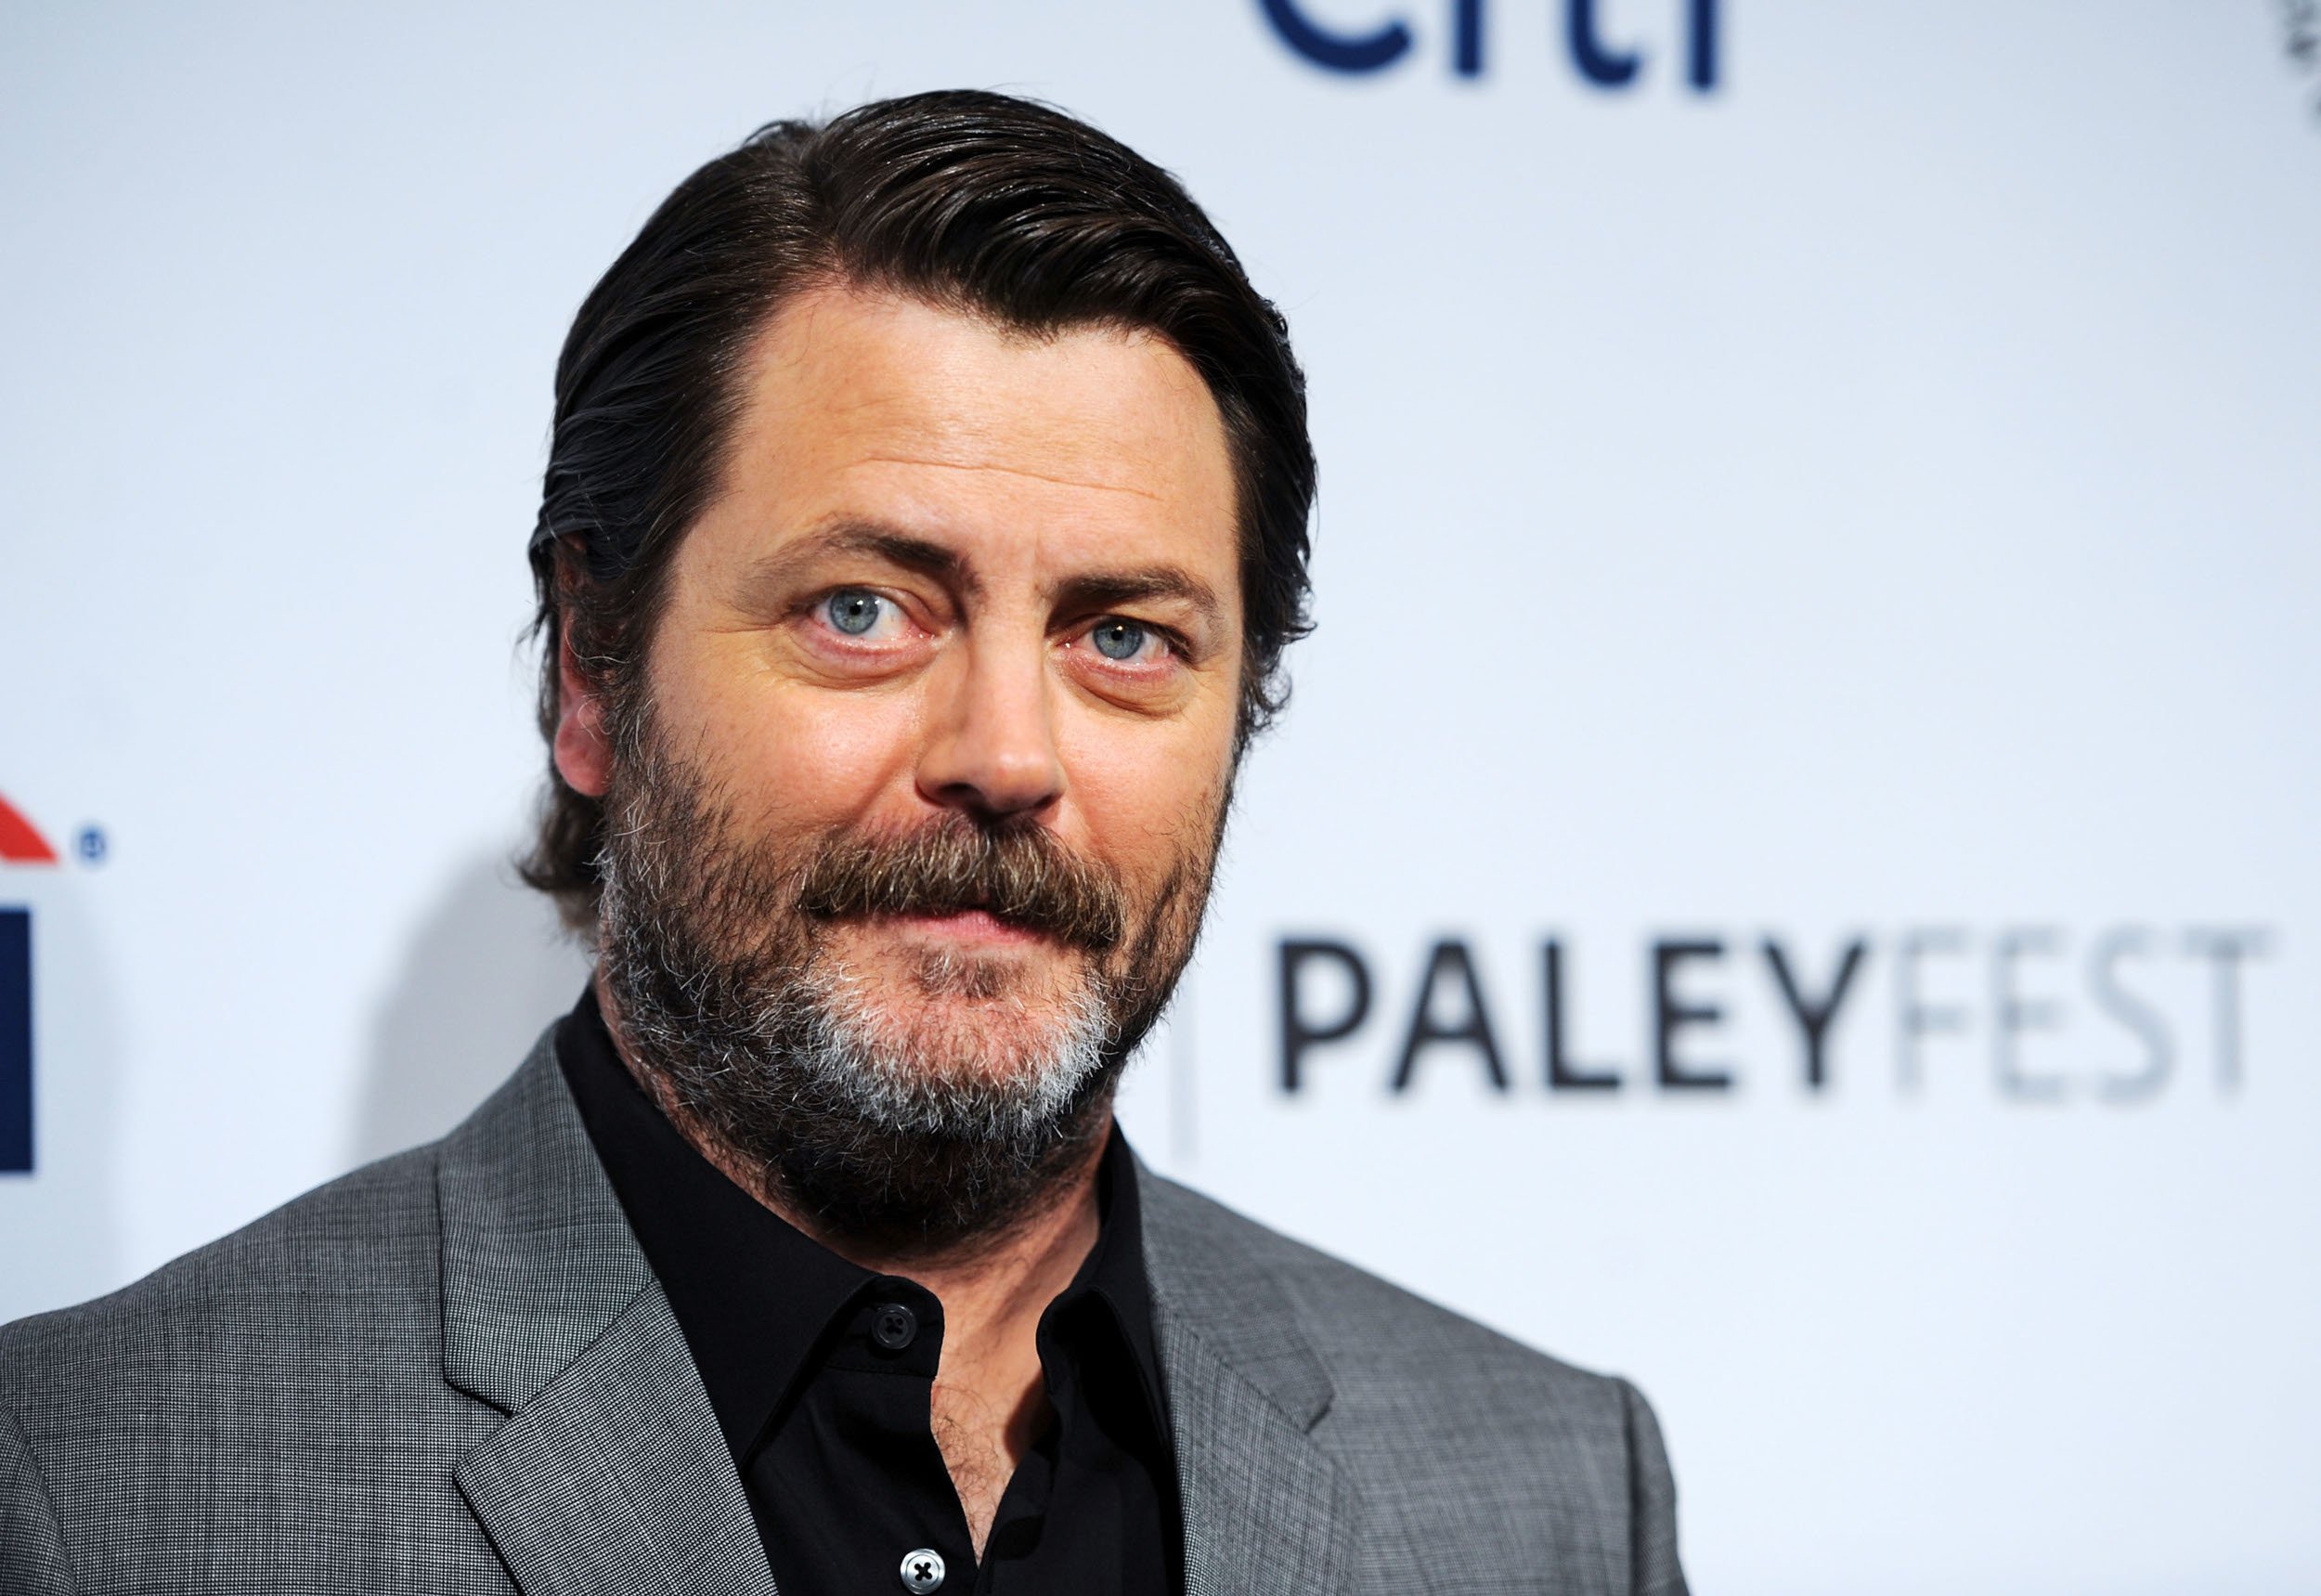 'Parks and Recreation' star Nick Offerman wearing a grey suit and standing in front of a PaleyFest wall